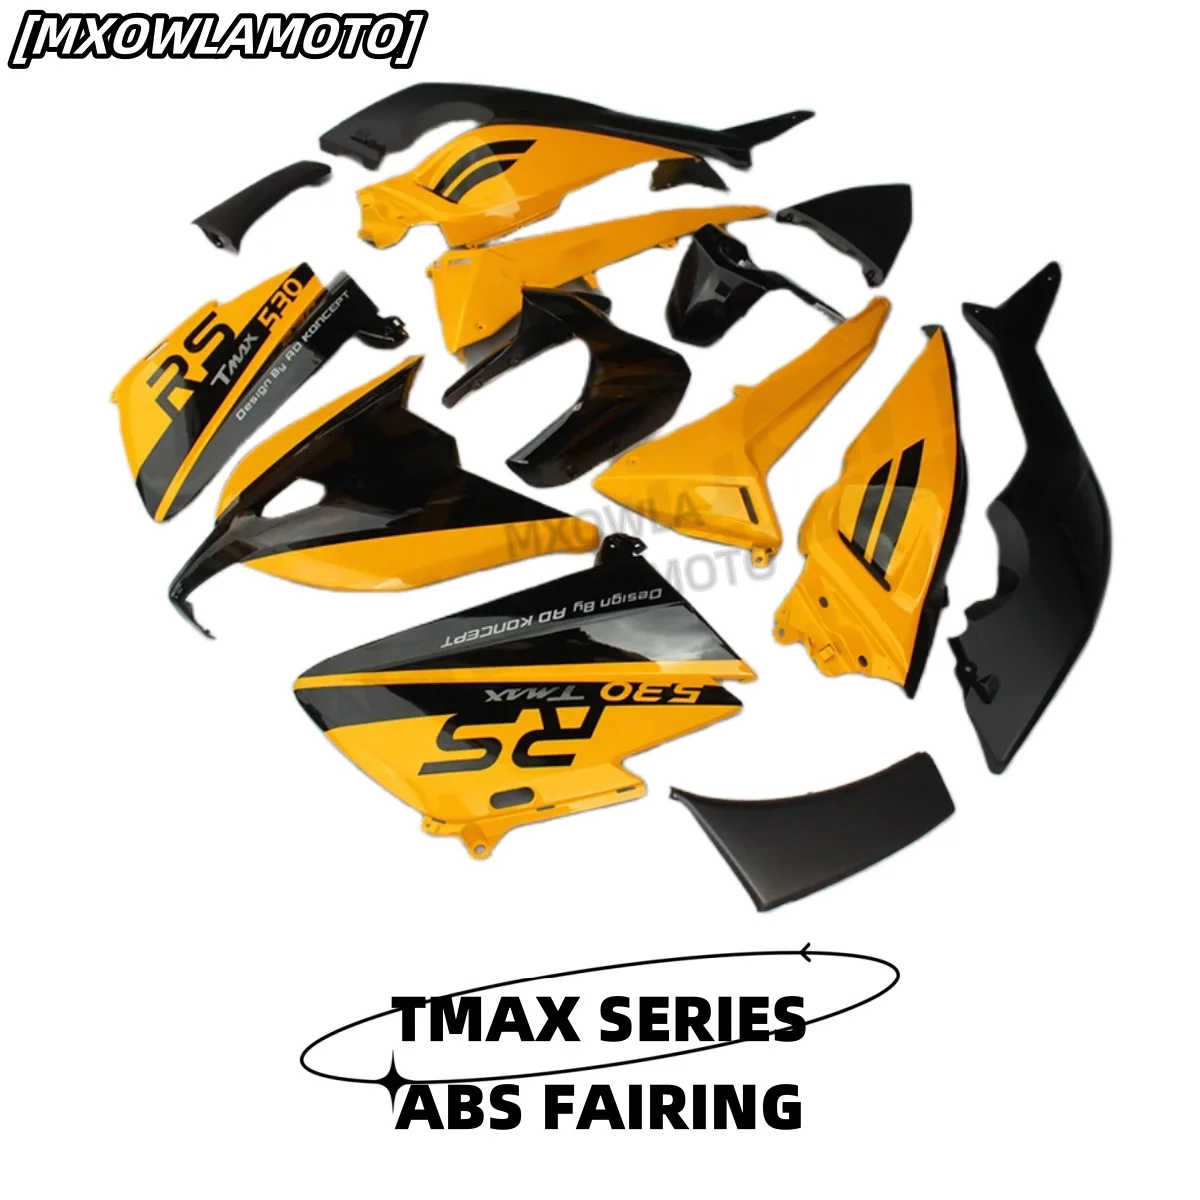 

ABS Plastic Injection Fairing Kit Bodywork Bolts For TMAX 530 T-MAX 530 2012 2013 2014 2015 2016 2017 2018 2019 YELLOW BLACK